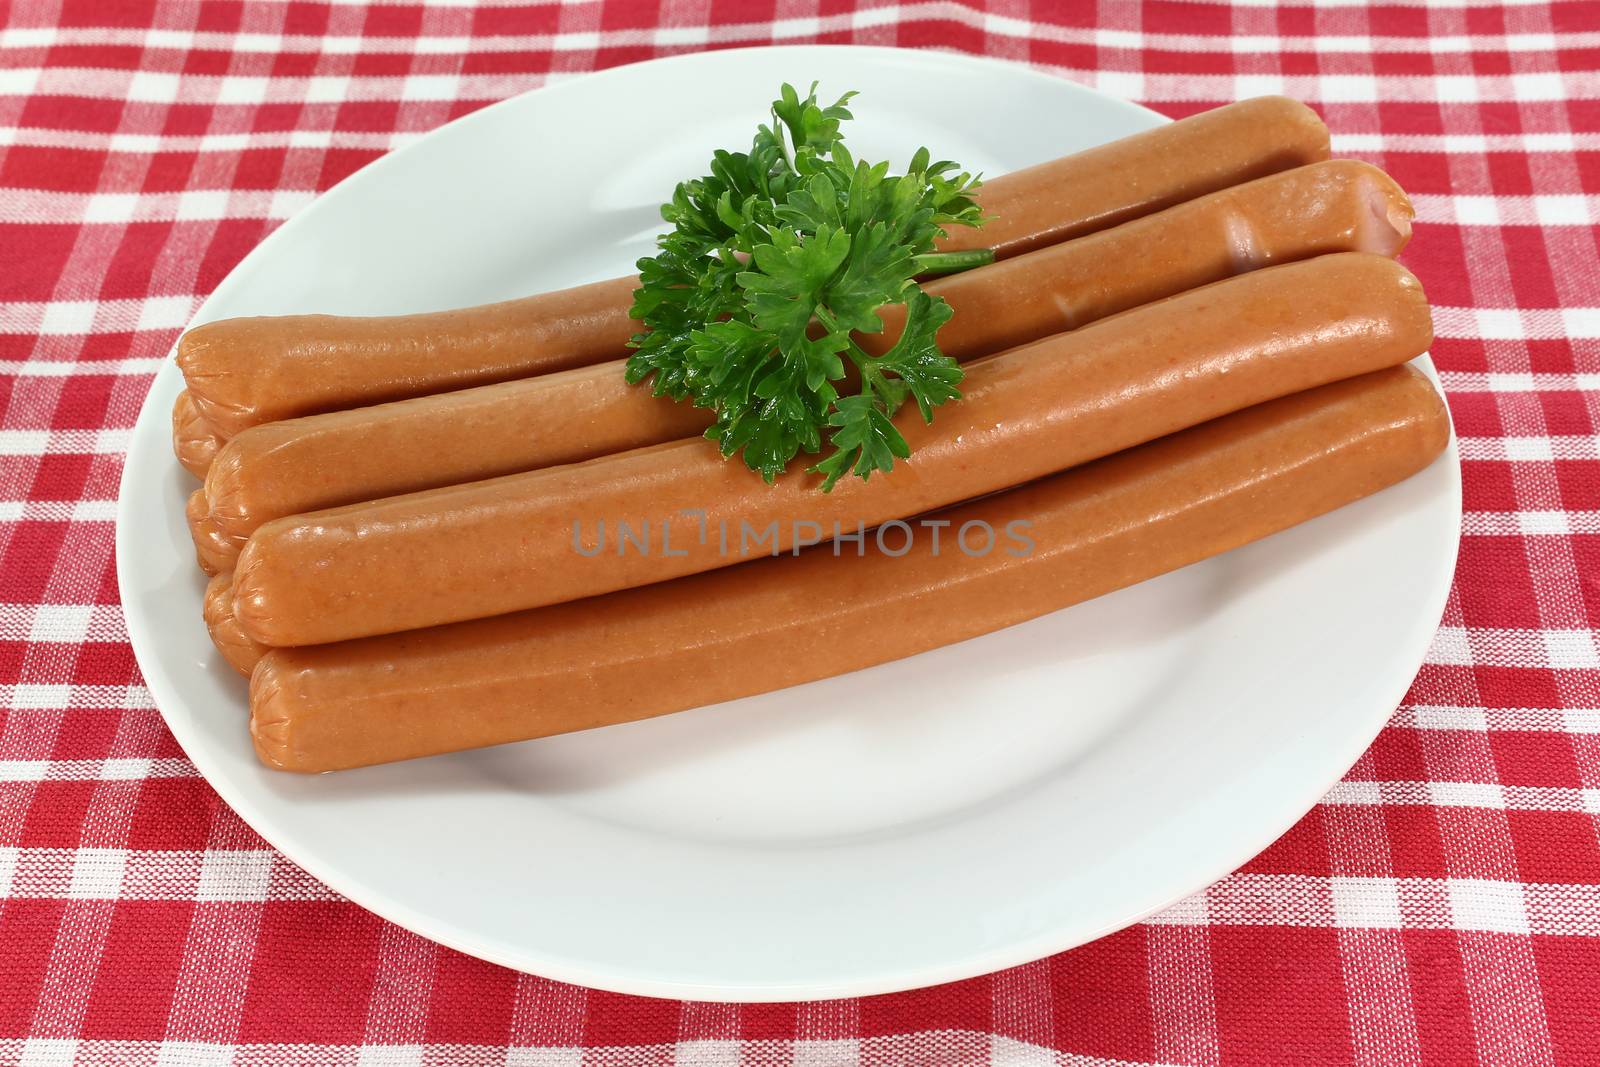 stacked Wiener sausages with parsley on a napkin